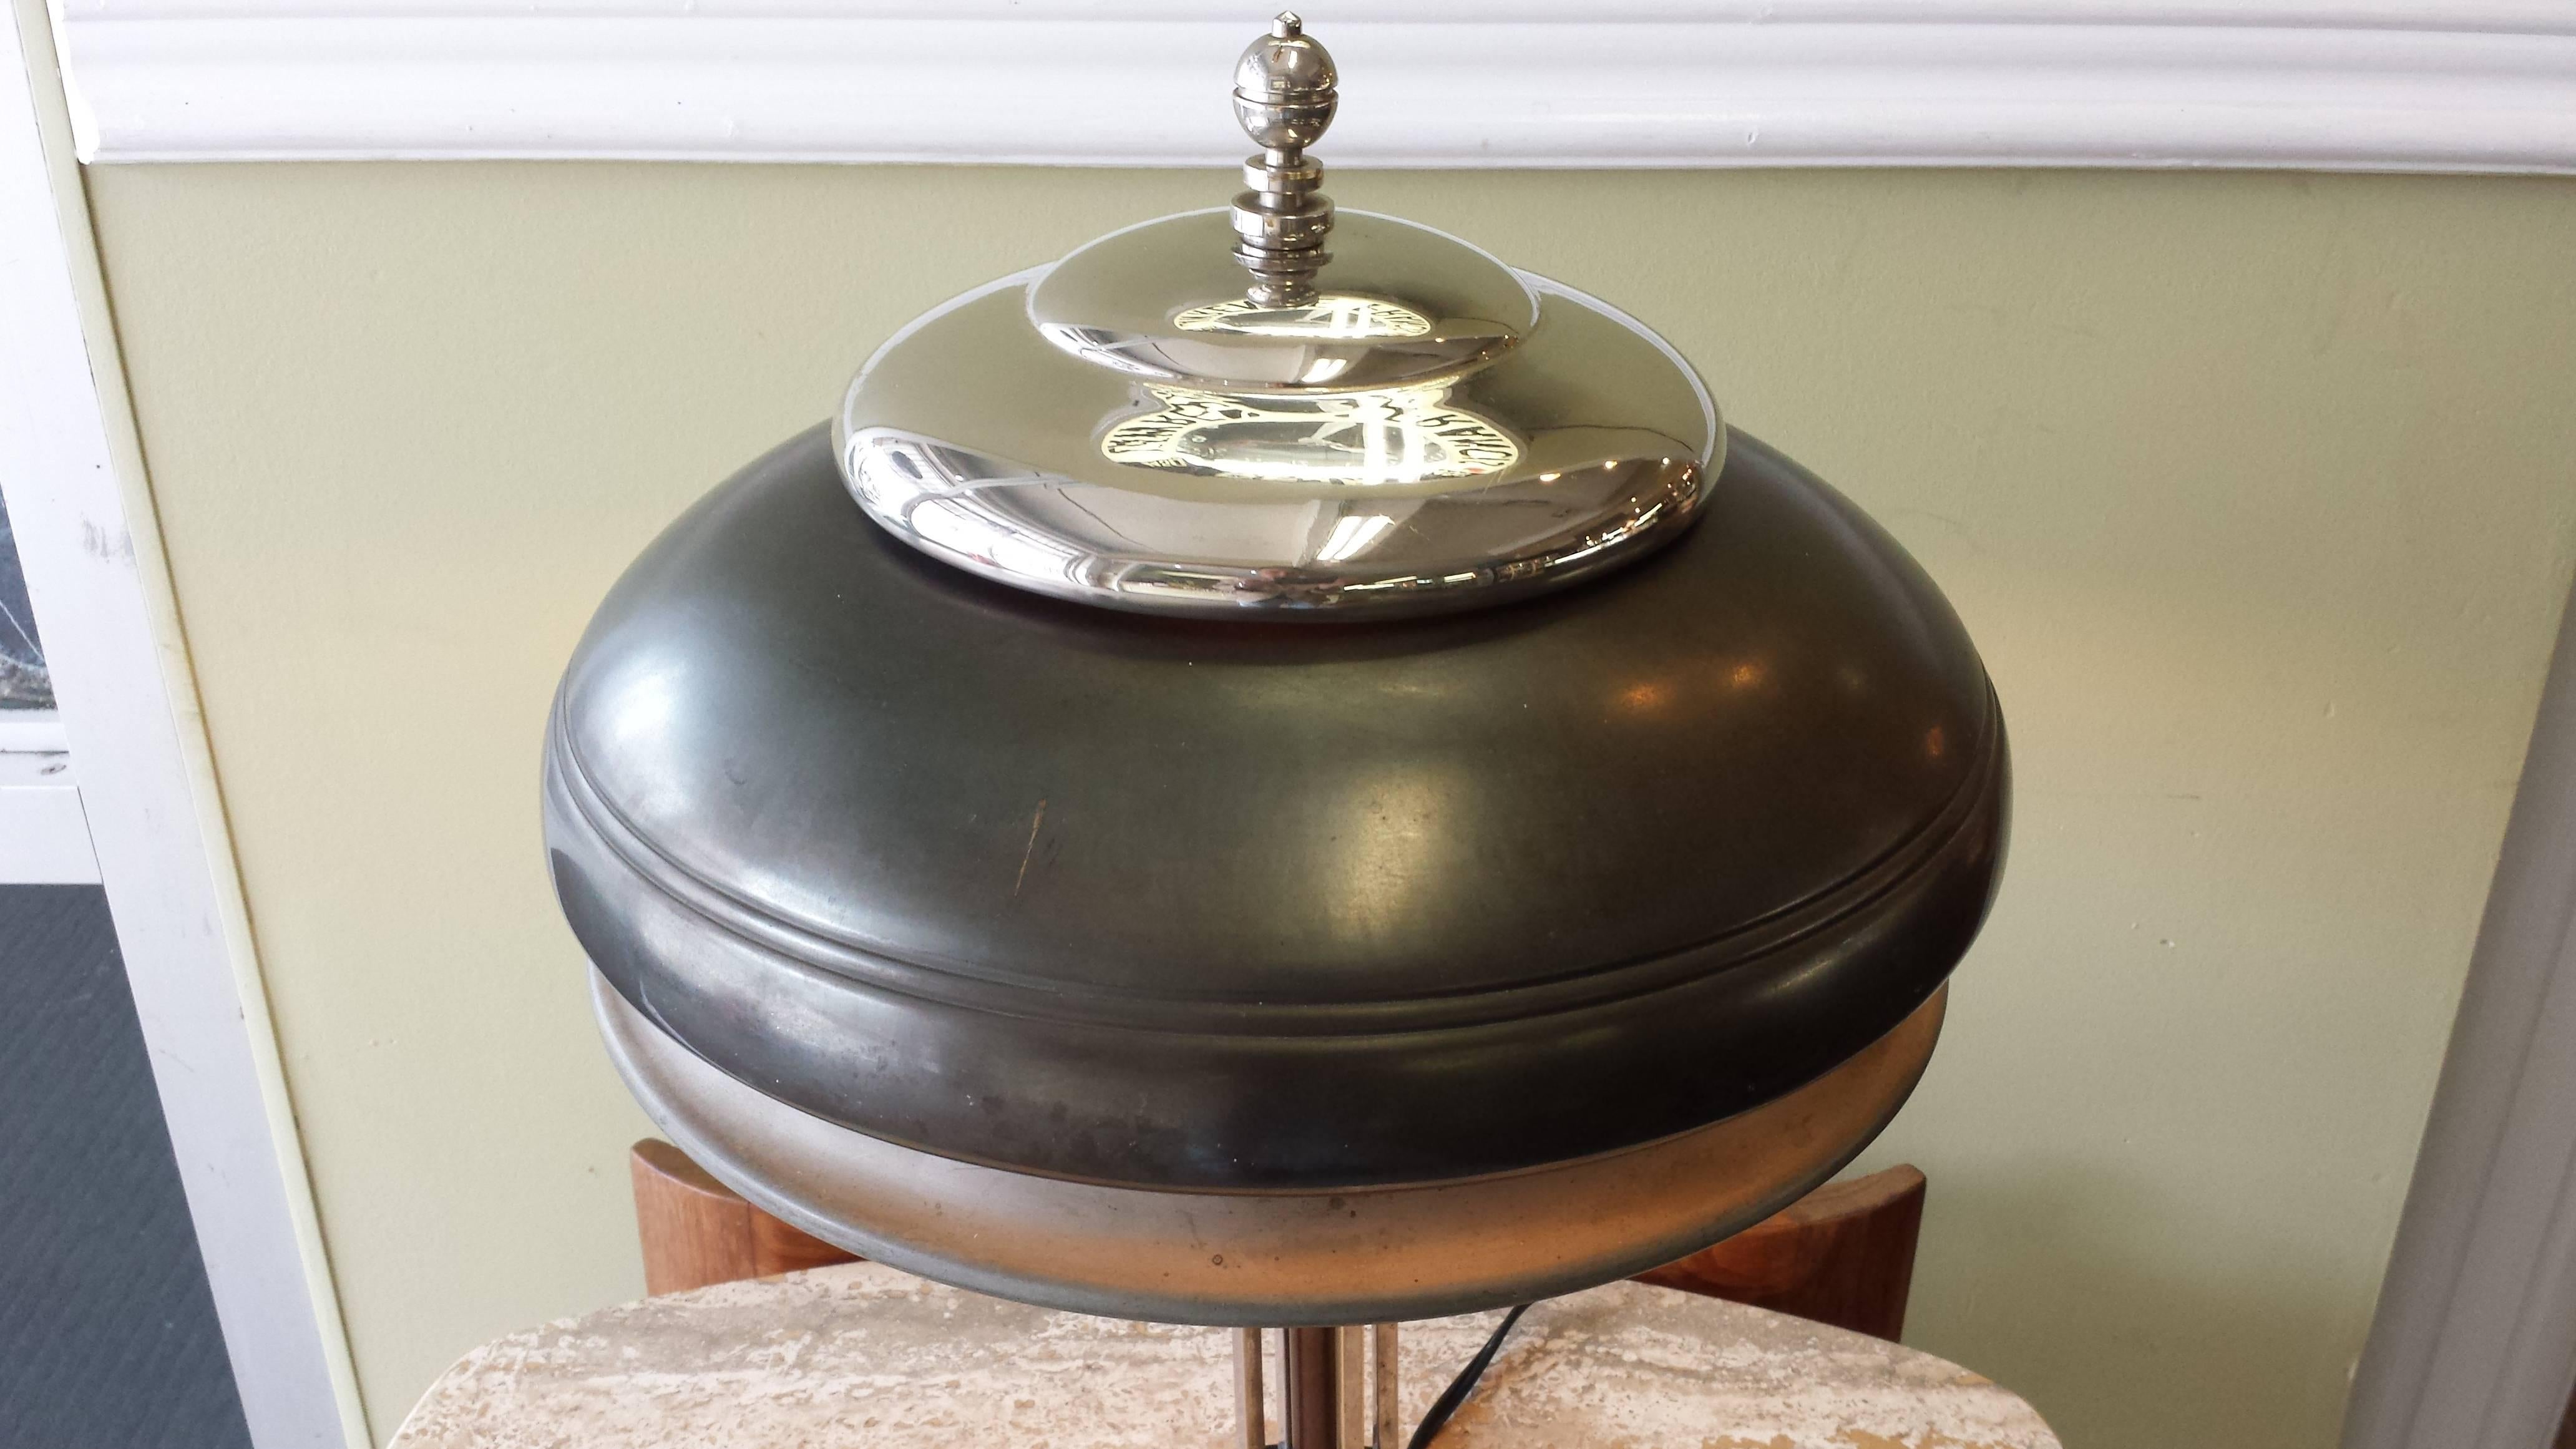 Vintage Markel Machine Age Art Deco table lamp, circa 1930s, the lamp has a three-tier metal shade and signature Markel finial. The base is a tube column and round disc, with black accent details. The lamp is in working condition, the lamp is